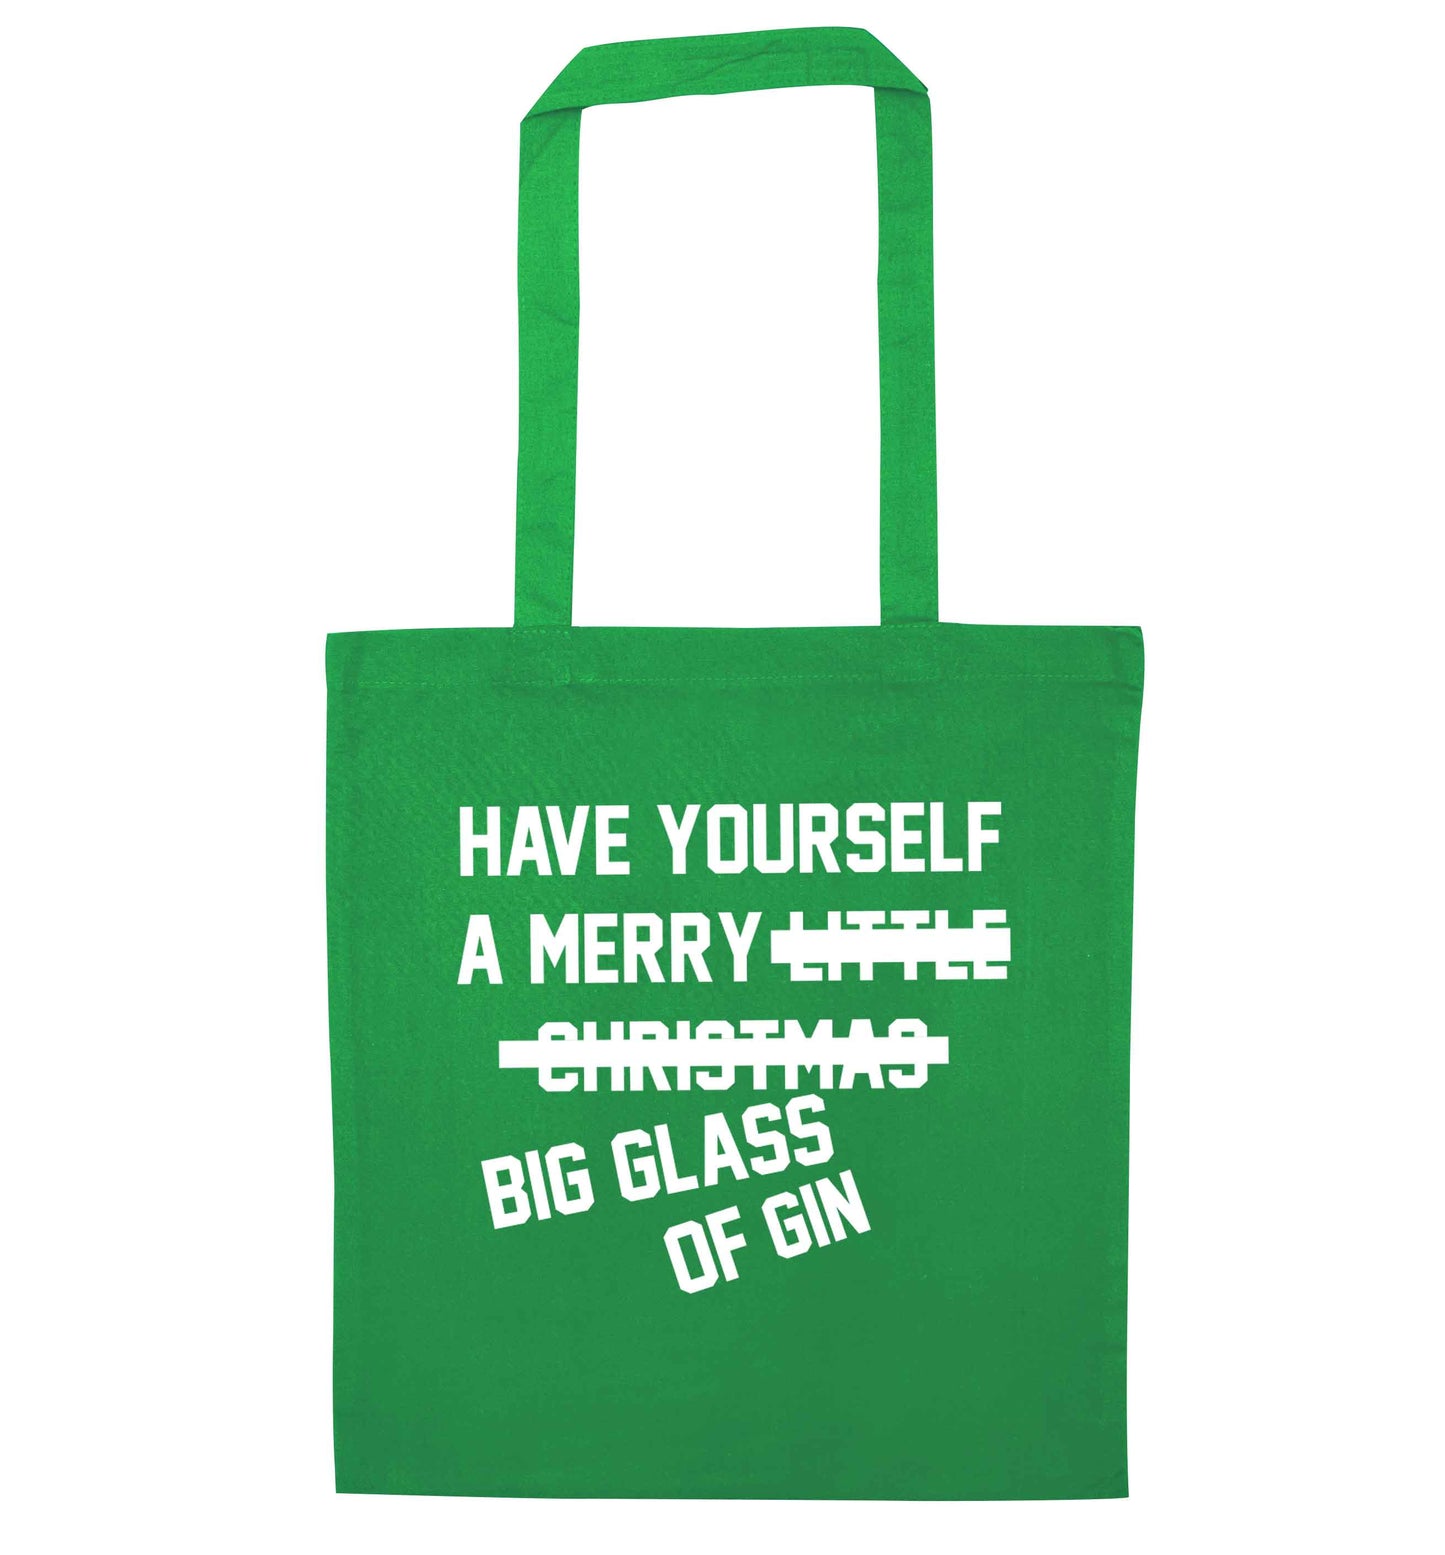 Have yourself a merry big glass of gin green tote bag